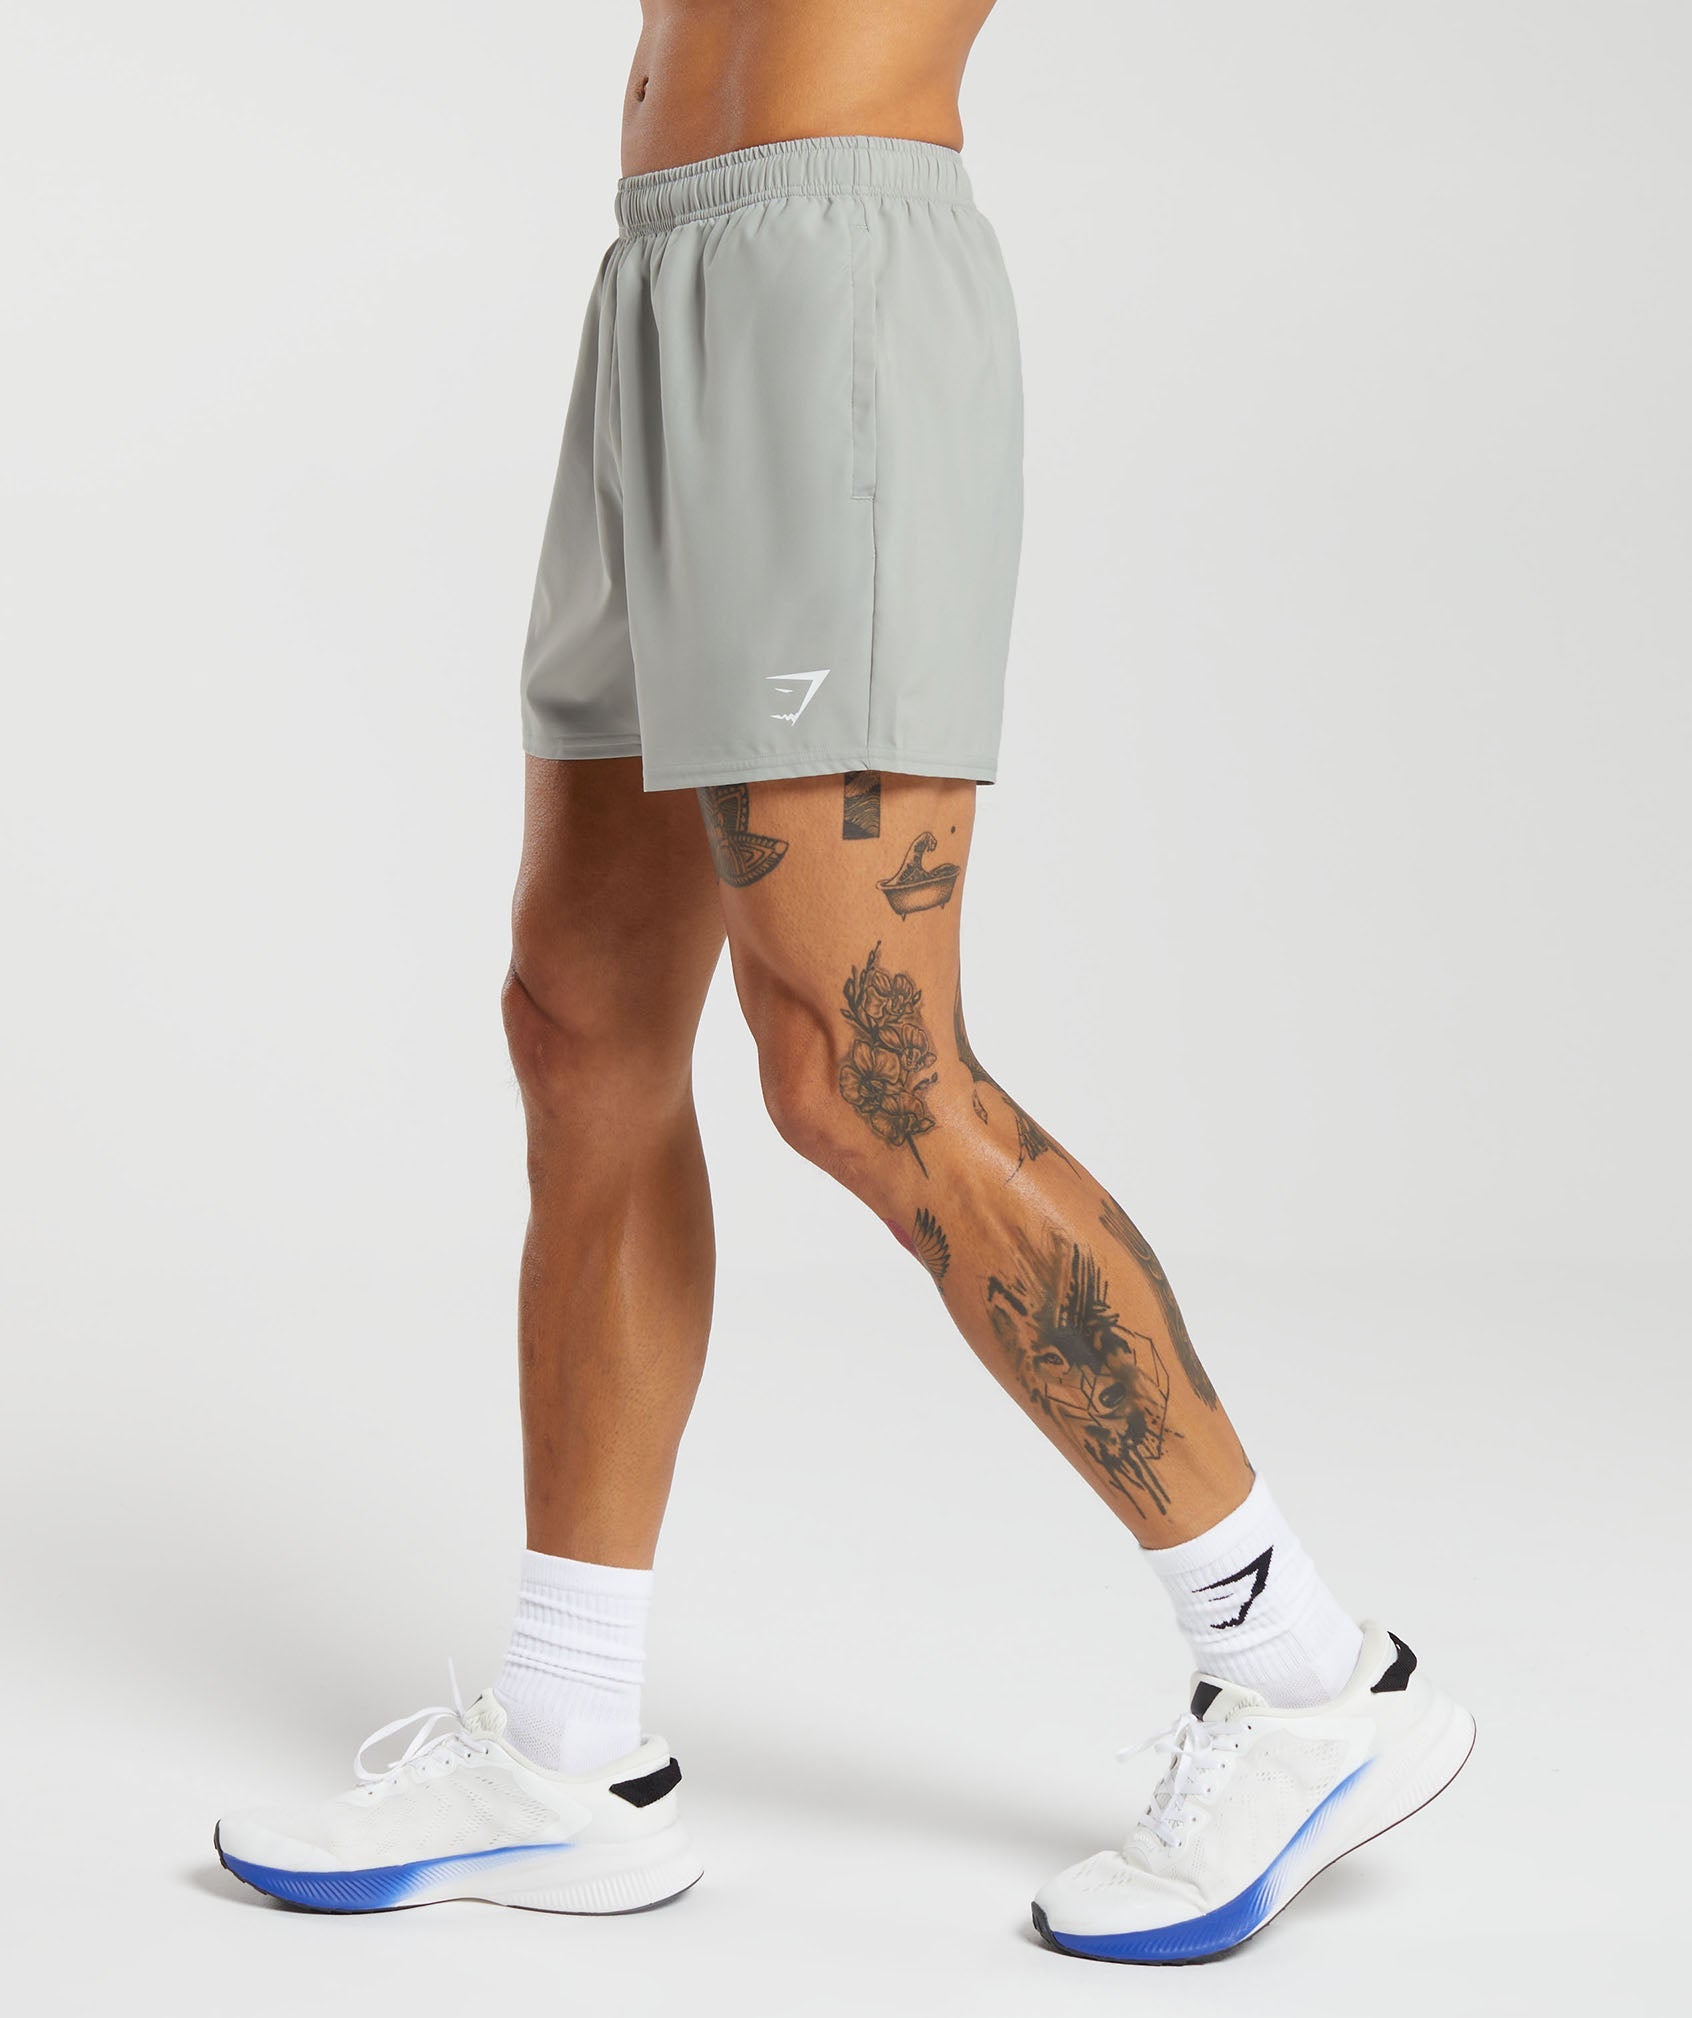 Arrival 5" Shorts in Stone Grey - view 3